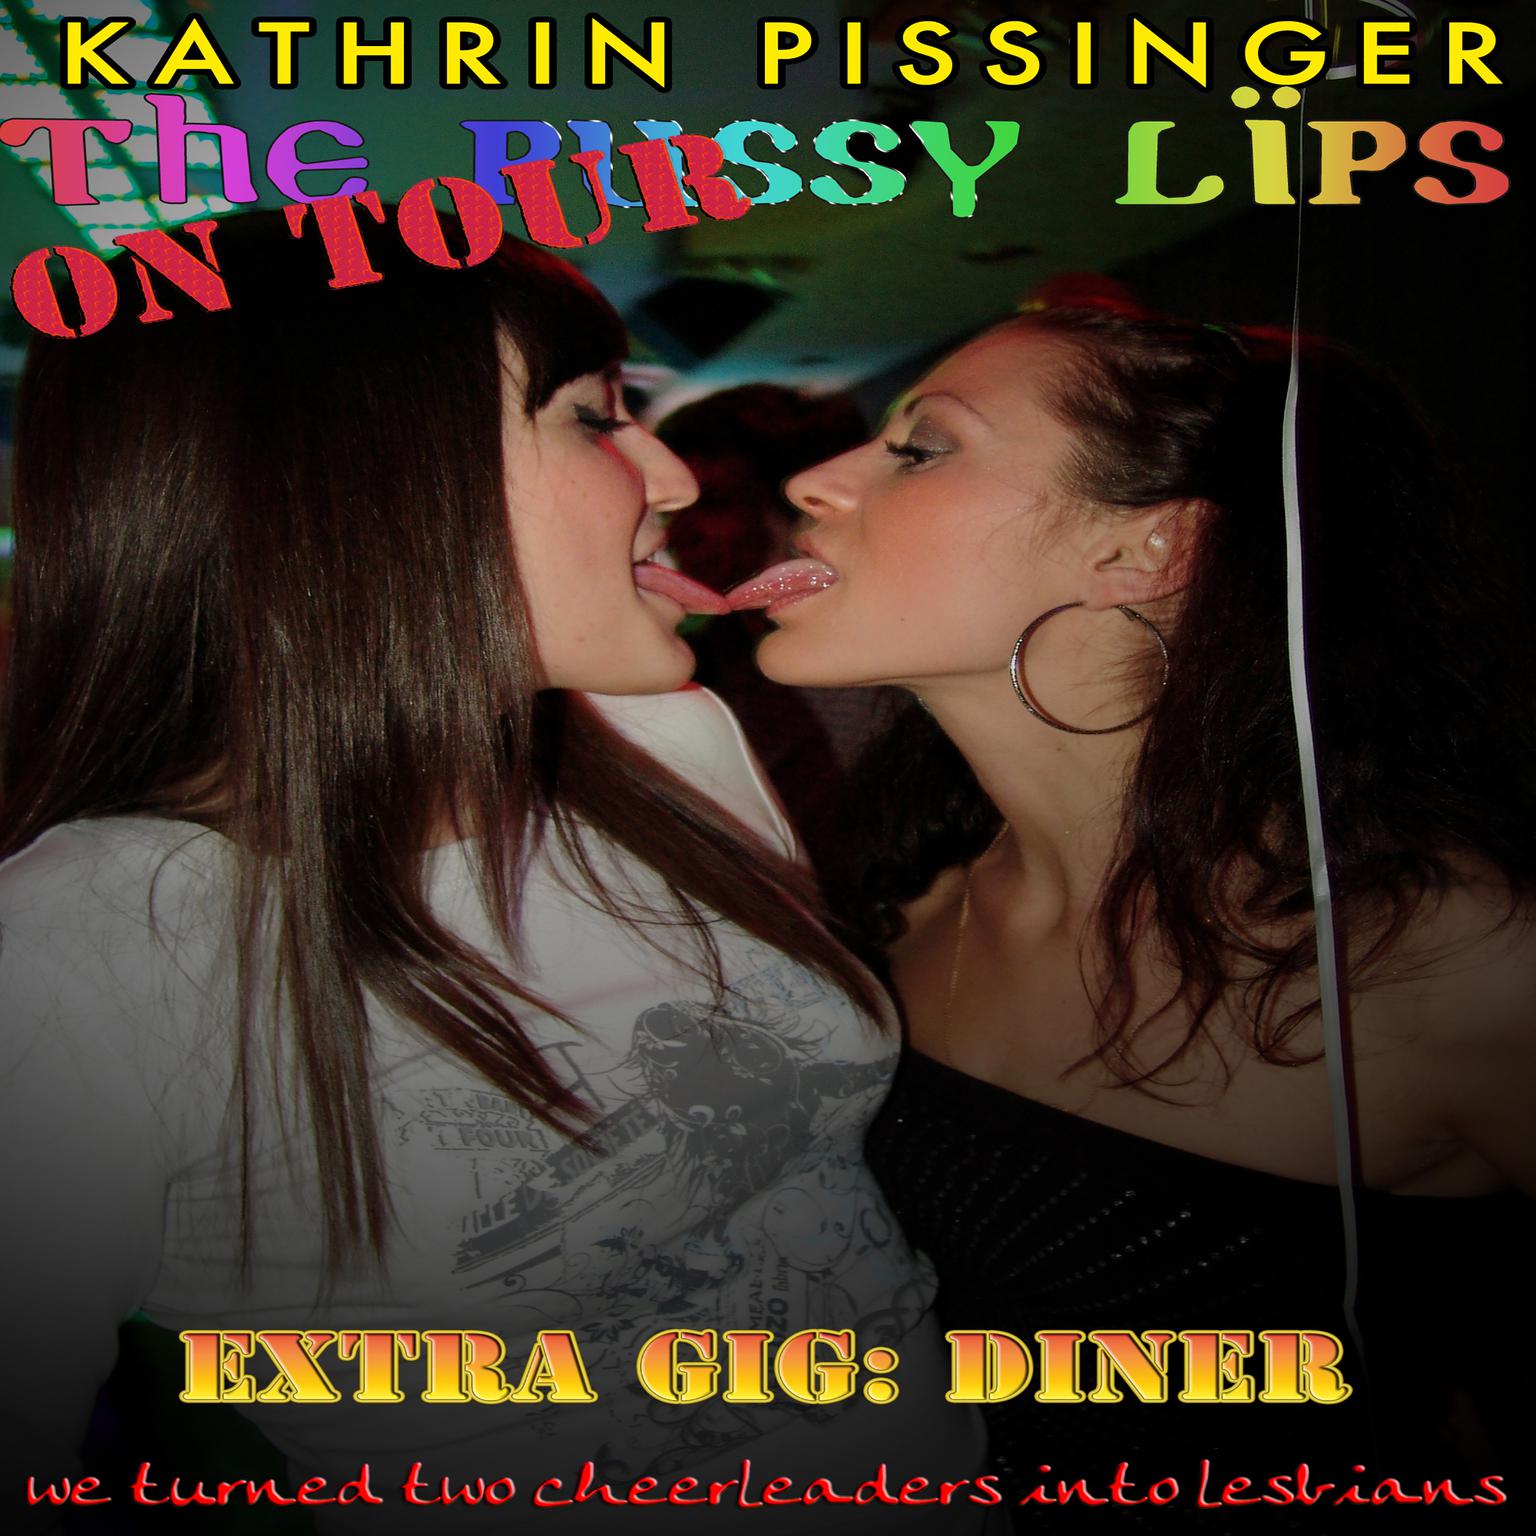 Extra Gig: Diner: we turned two cheerleaders into lesbians Audiobook, by Kathrin Pissinger